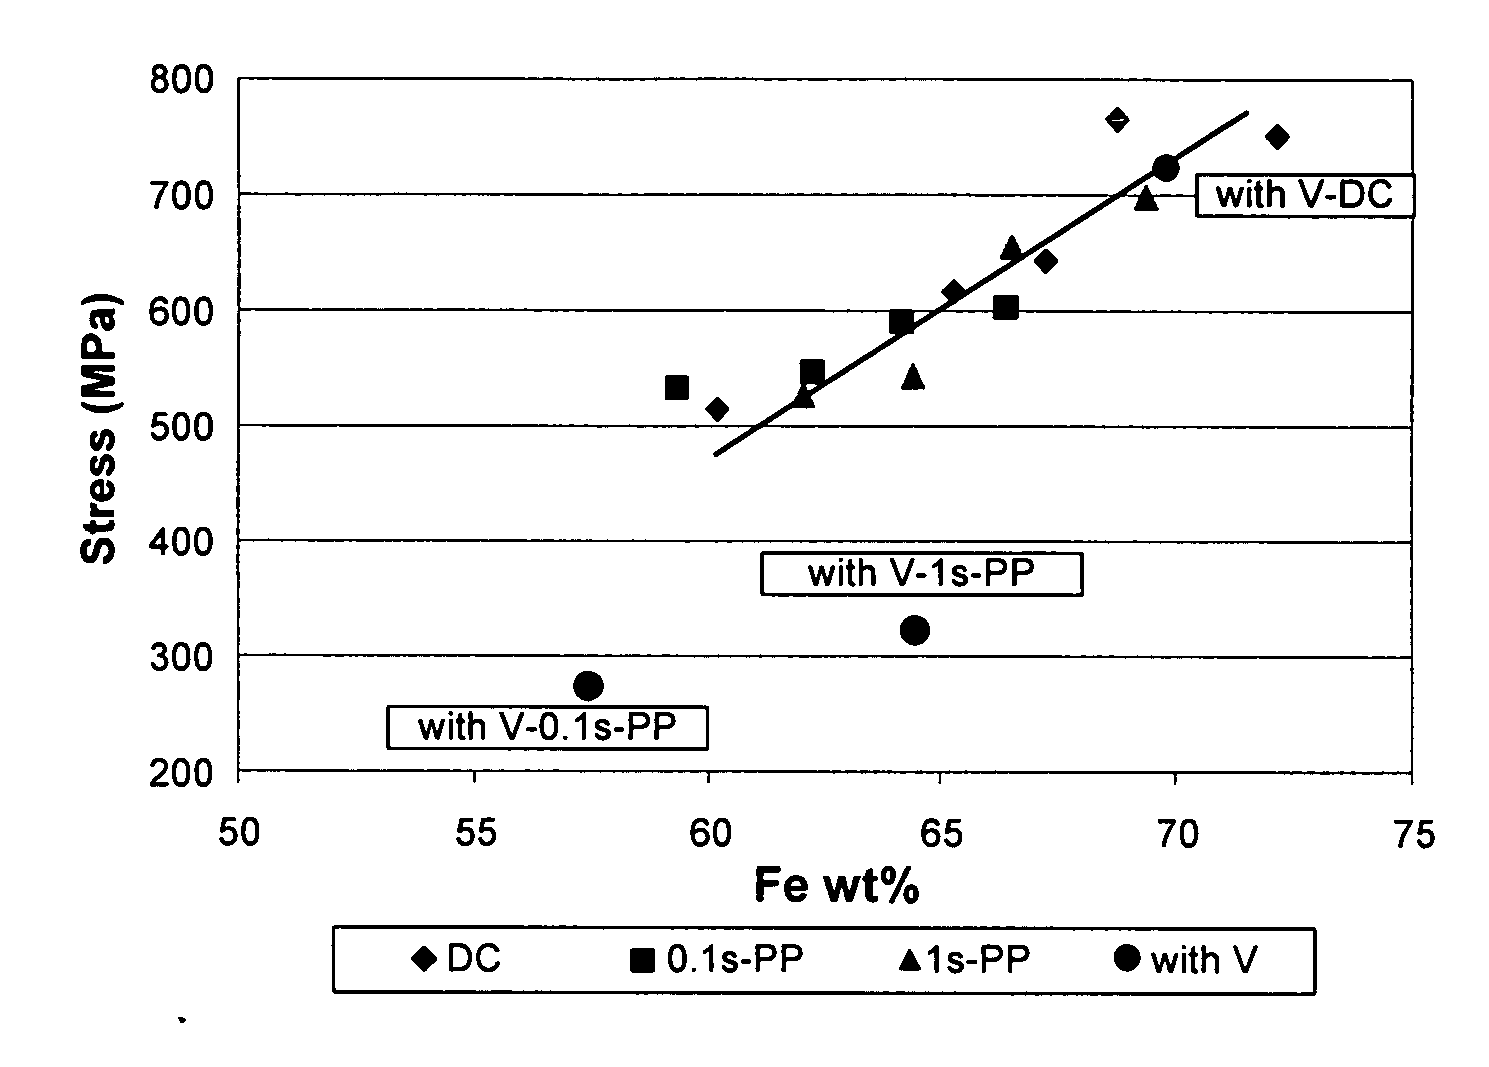 Method for lowering deposition stress, improving ductility, and enhancing lateral growth in electrodeposited iron-containing alloys